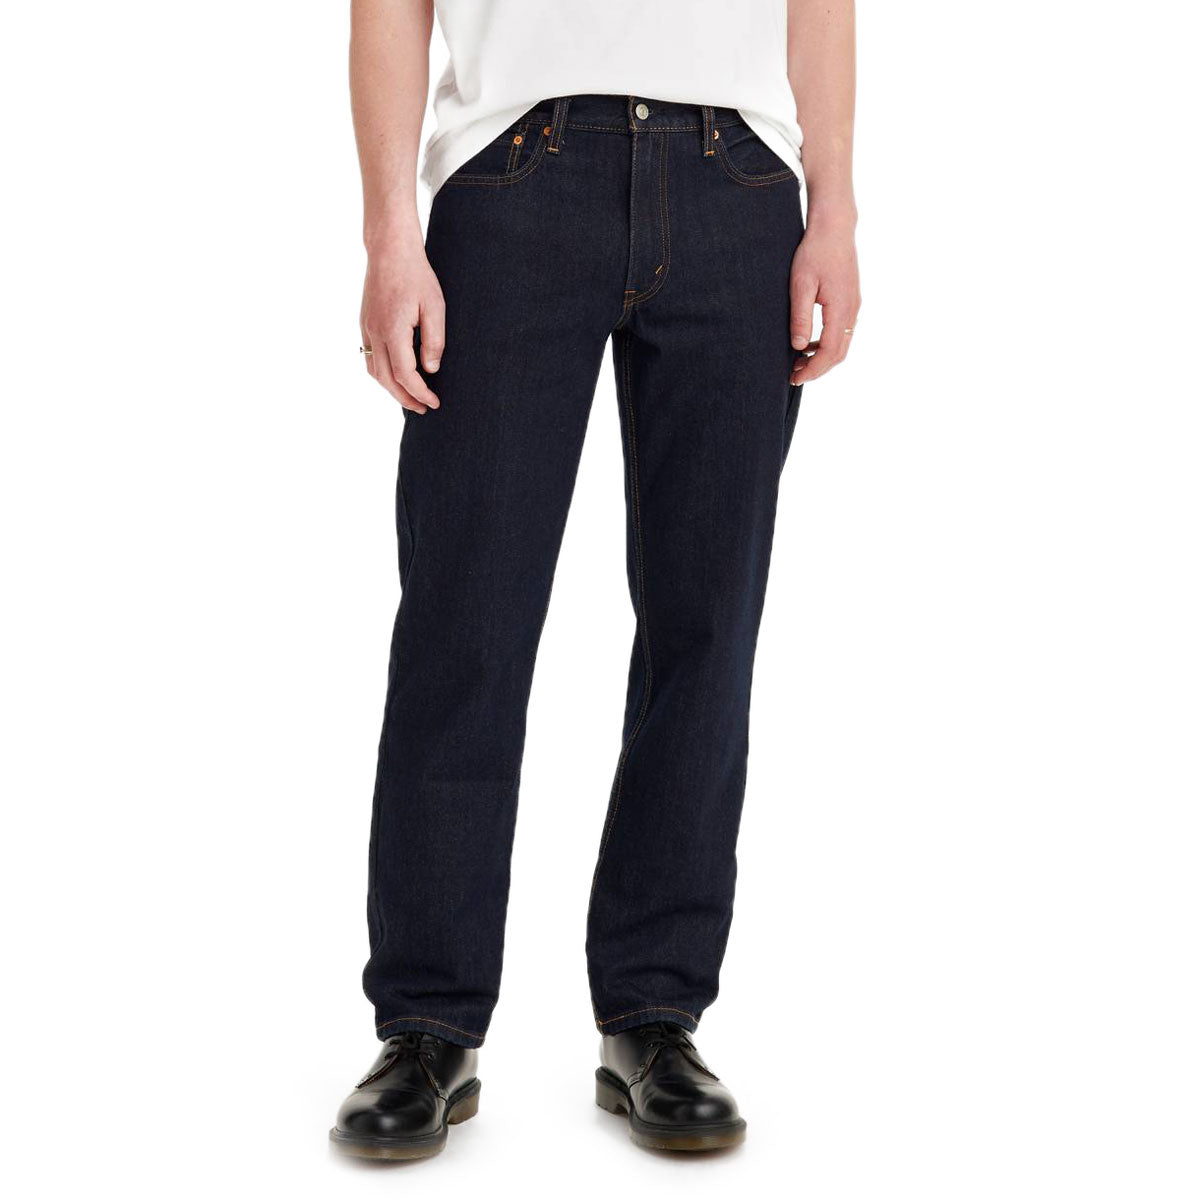 Levi's 550 Relaxed Jeans - Rinse image 1